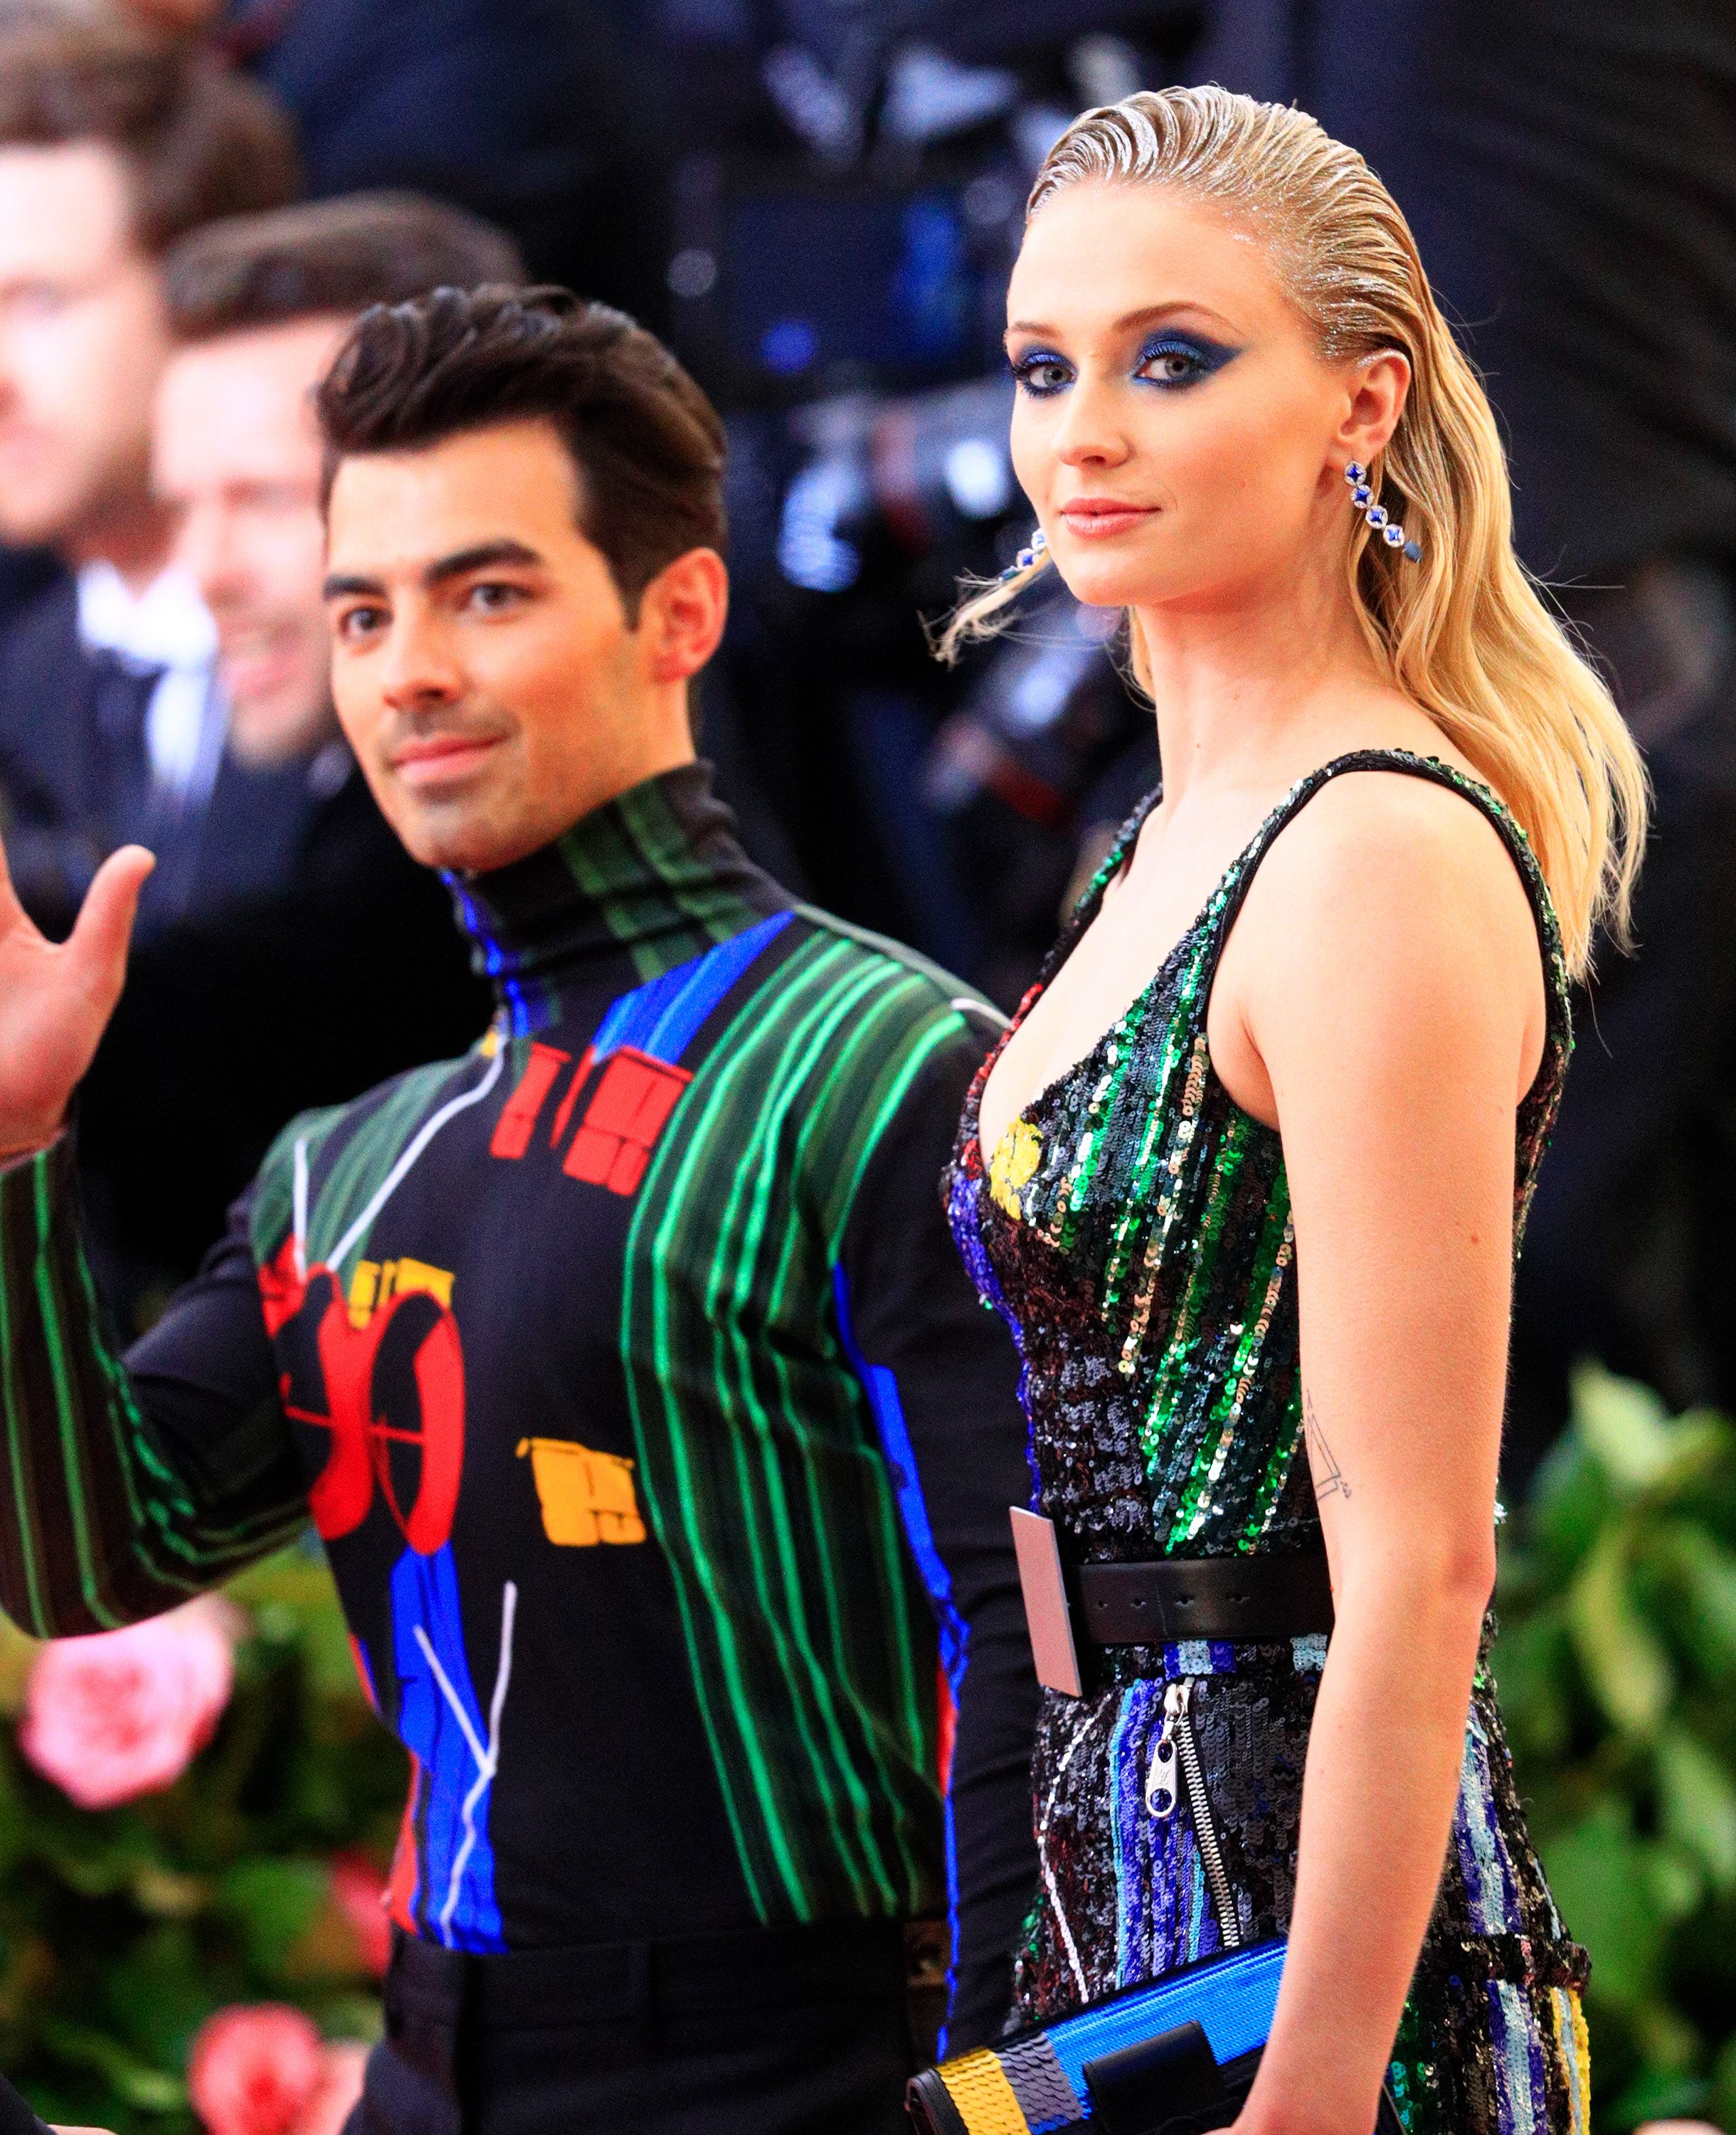 Sophie Turner's Heart Flip: From Hating Jonas Brothers To Thinking